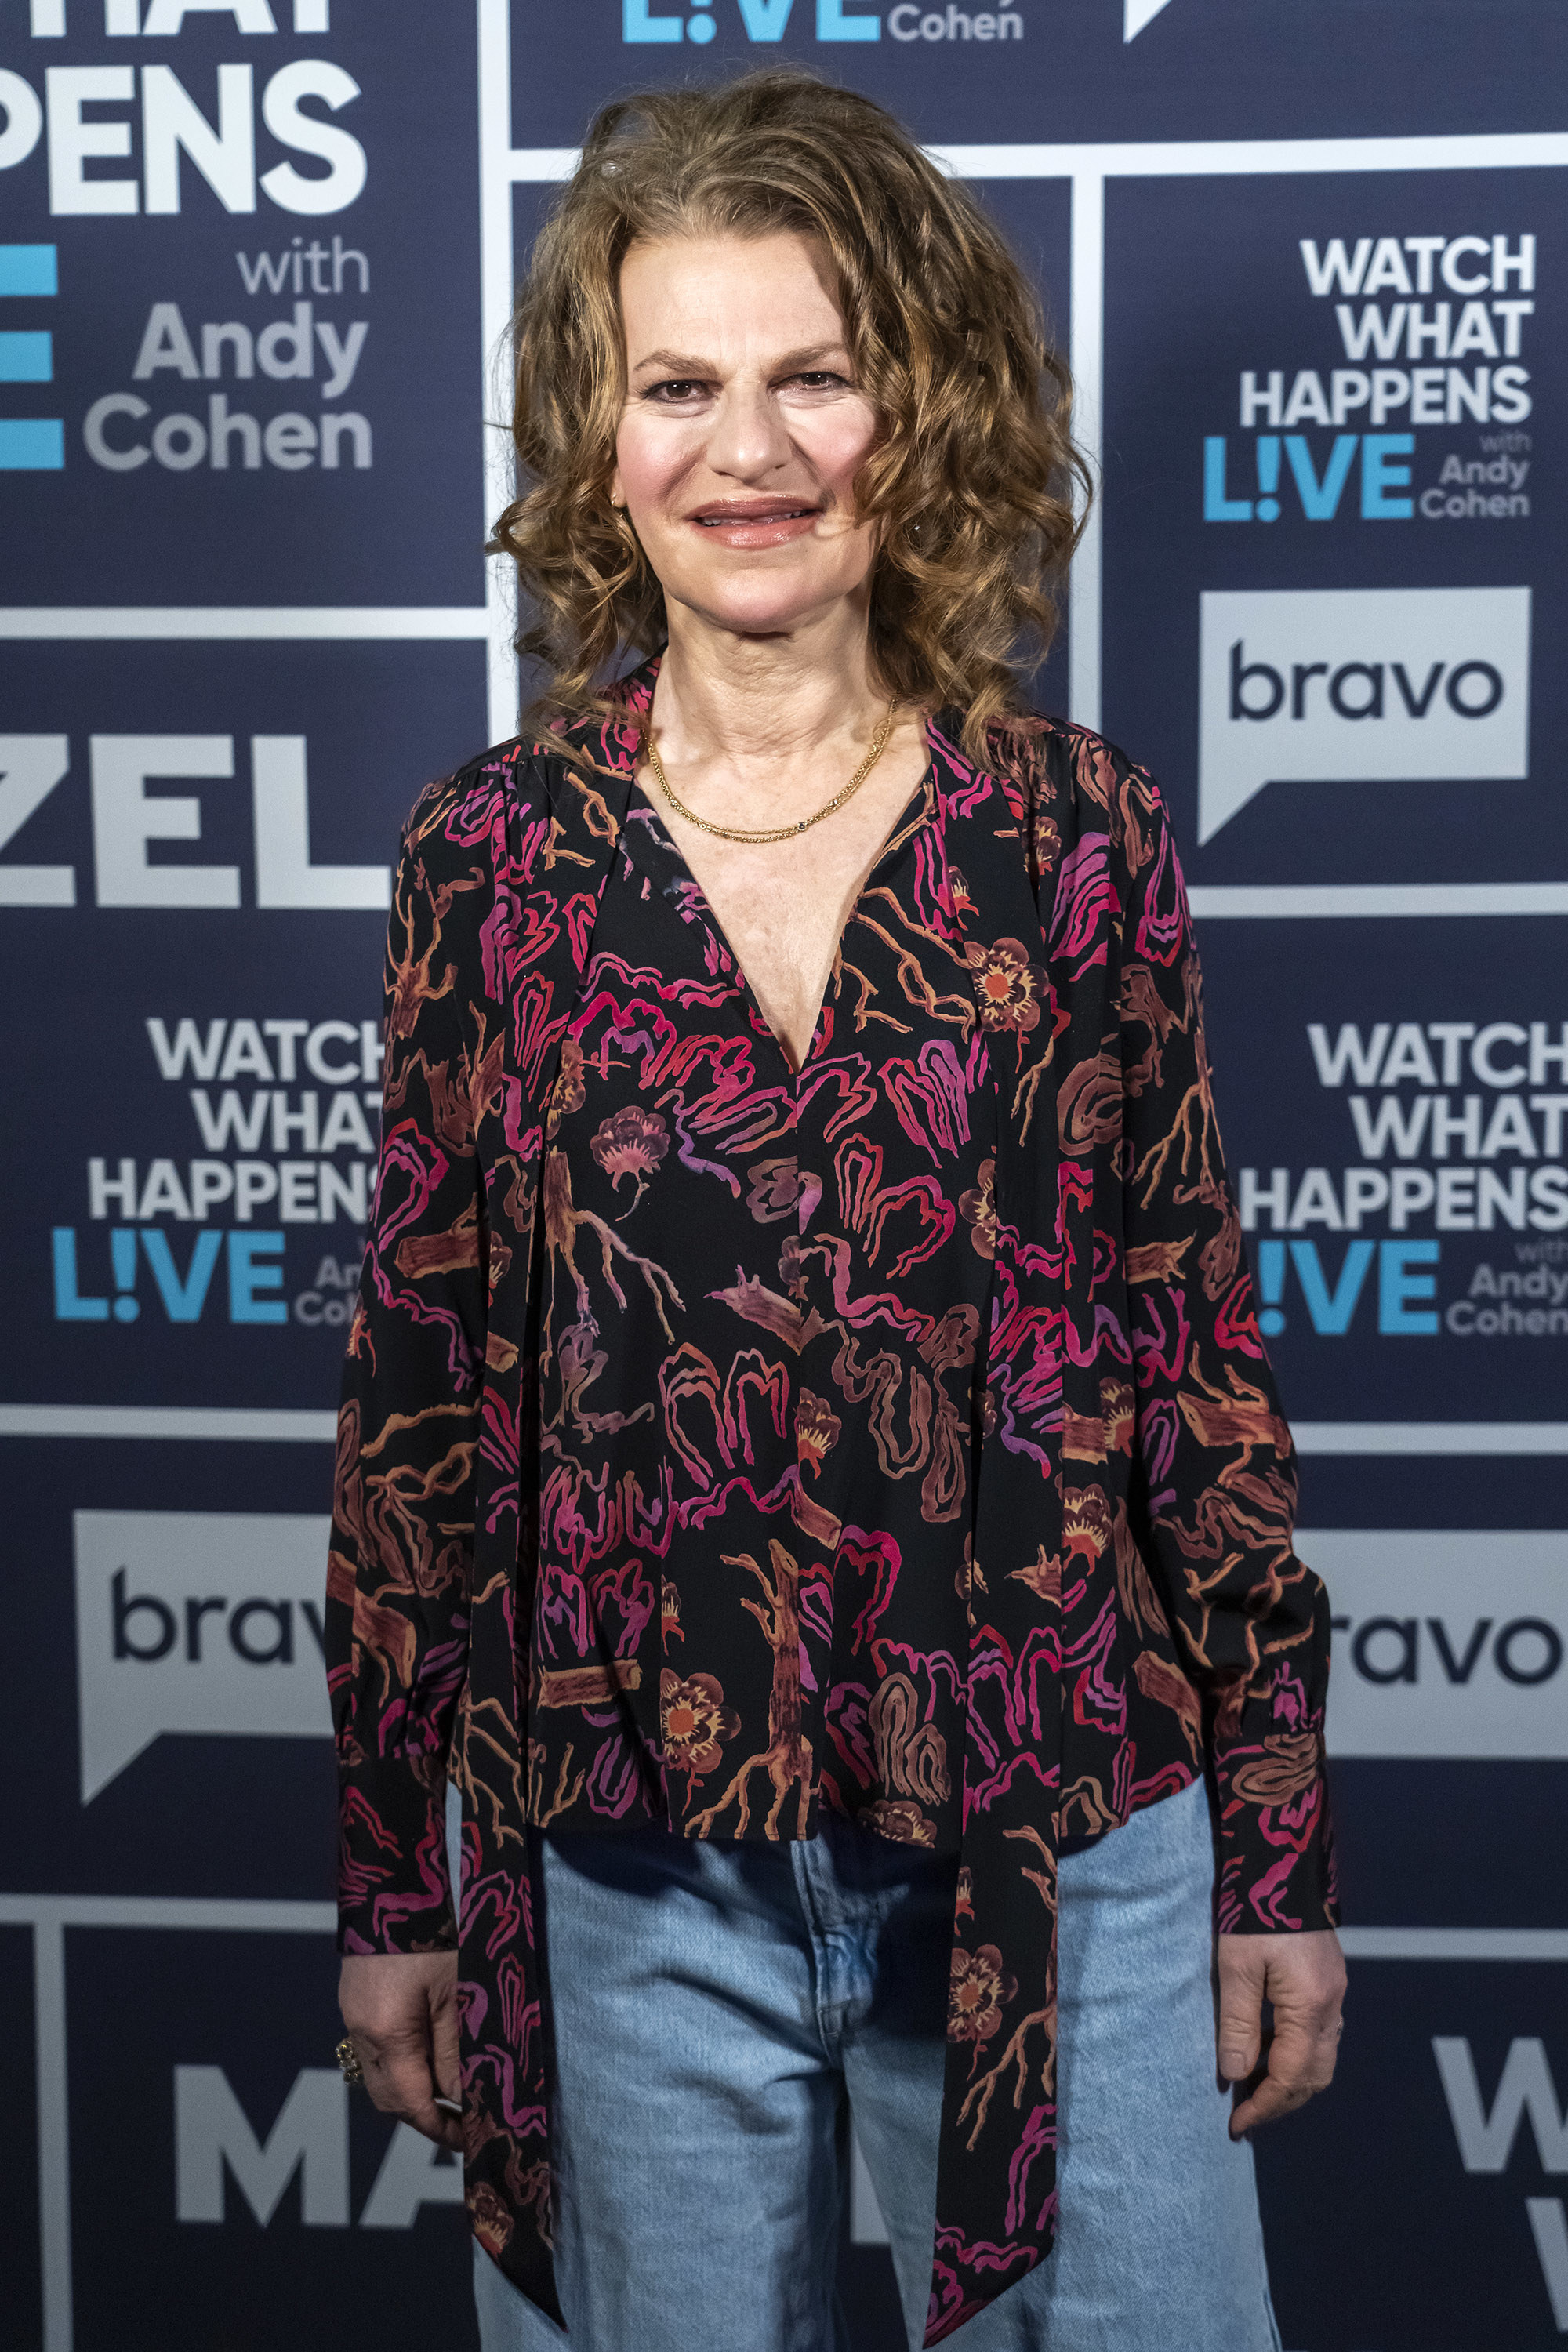 Sandra Bernhard on the red carpet in jeans and a colorful blouse